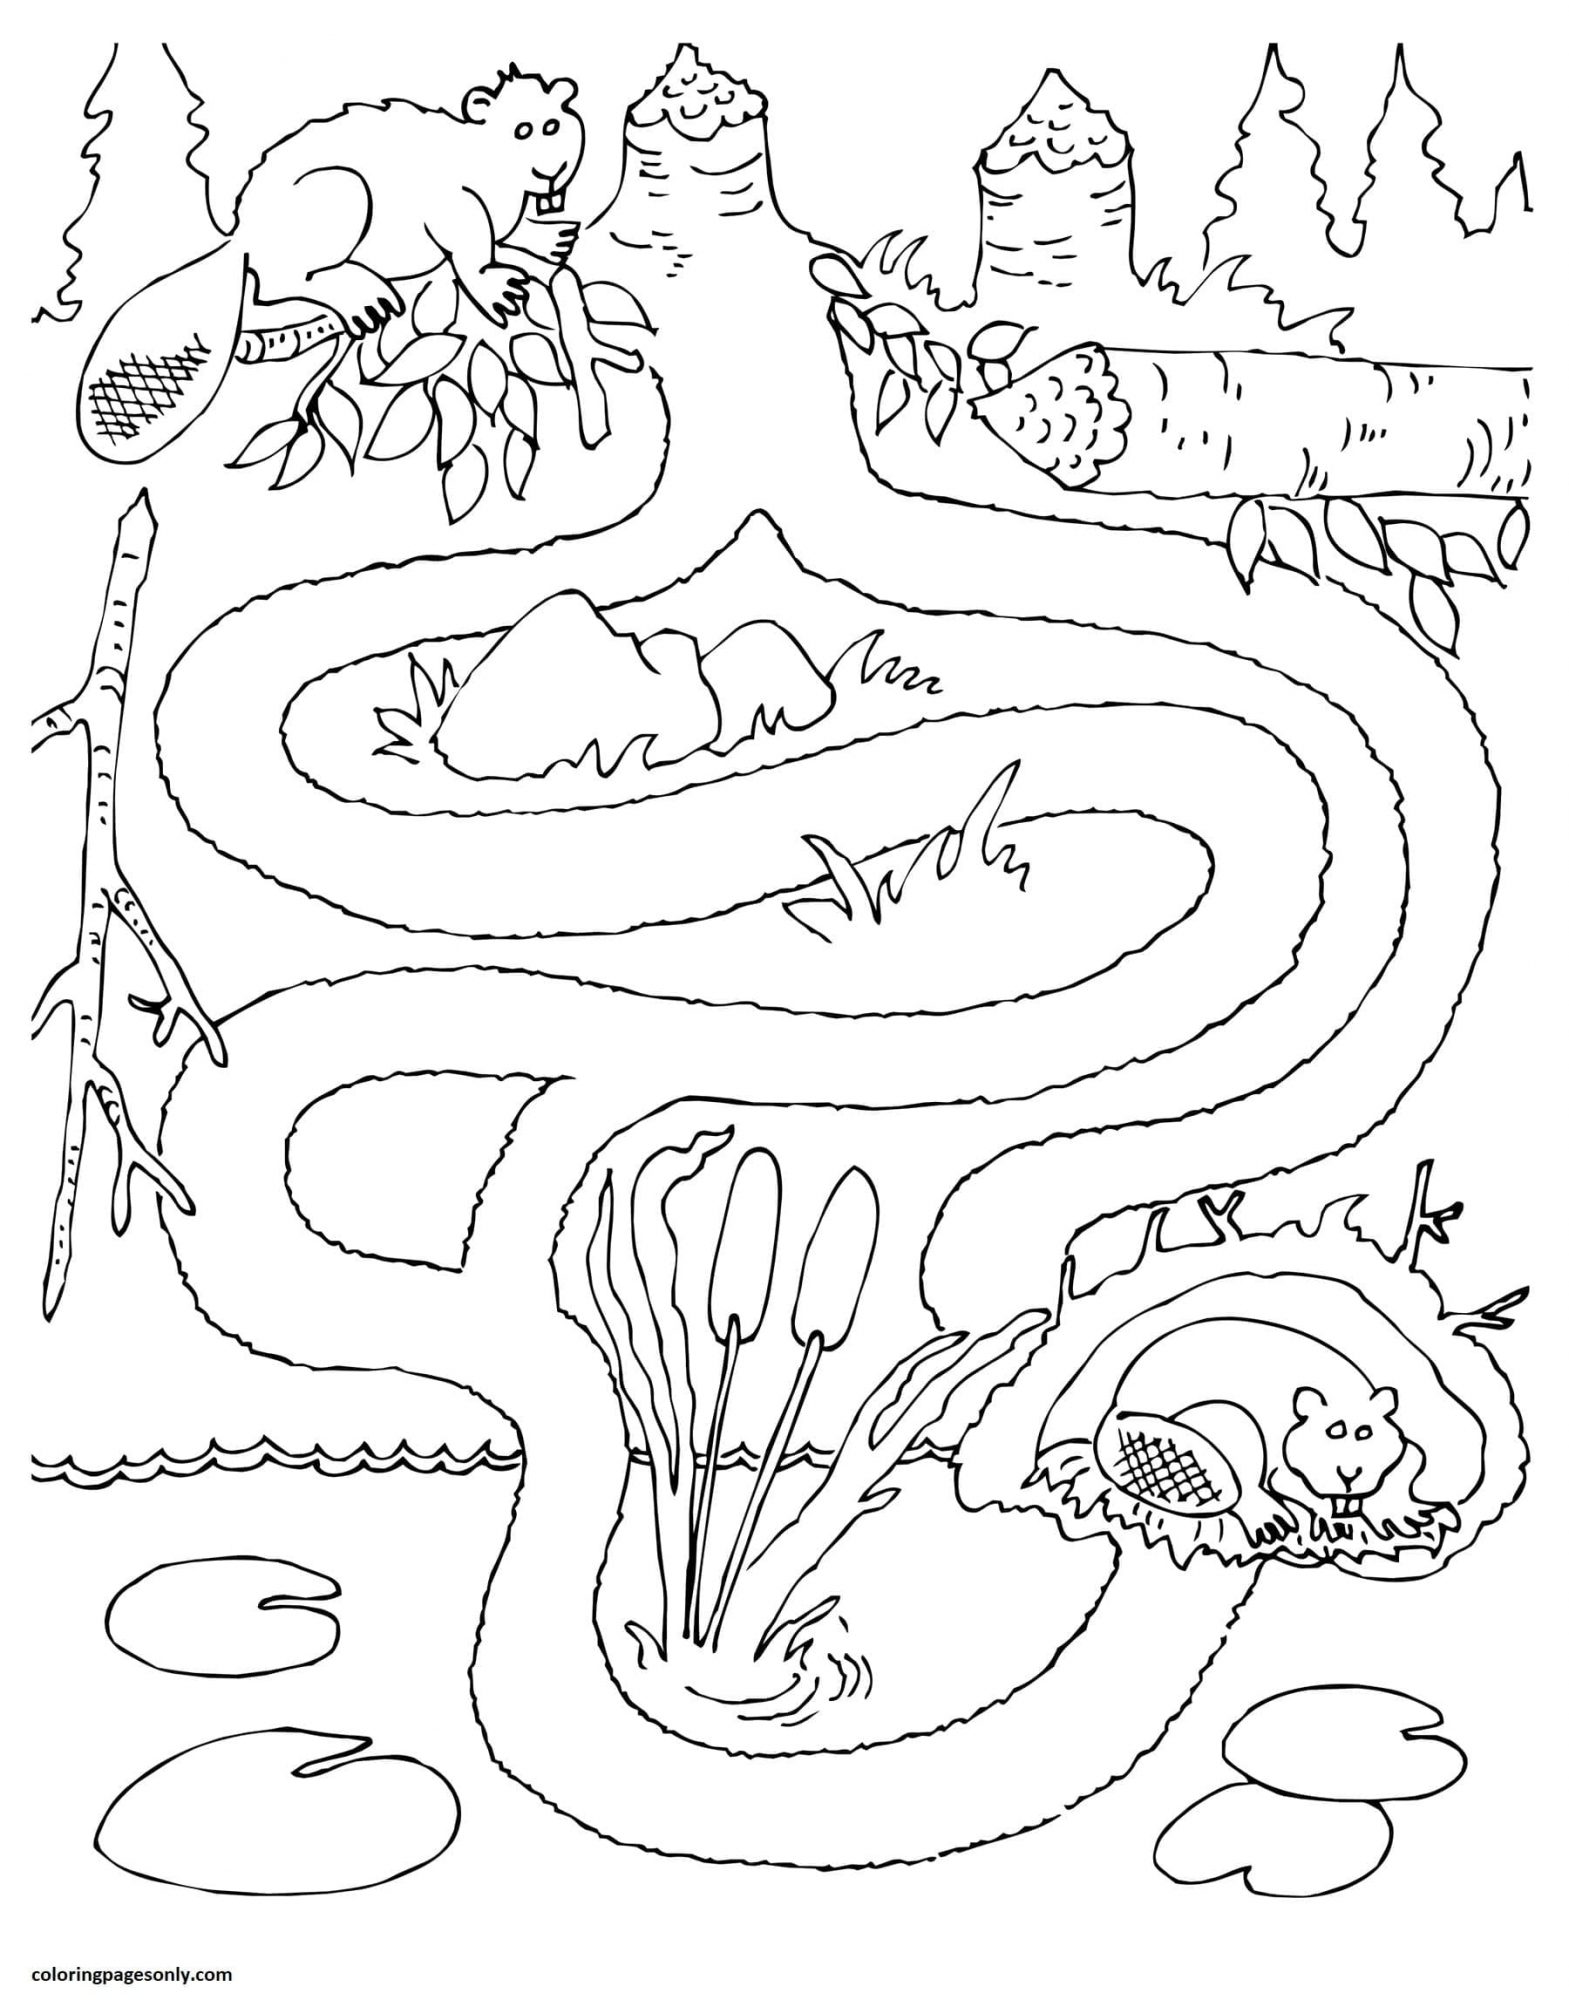 Beaver Activity Maze from Rivers